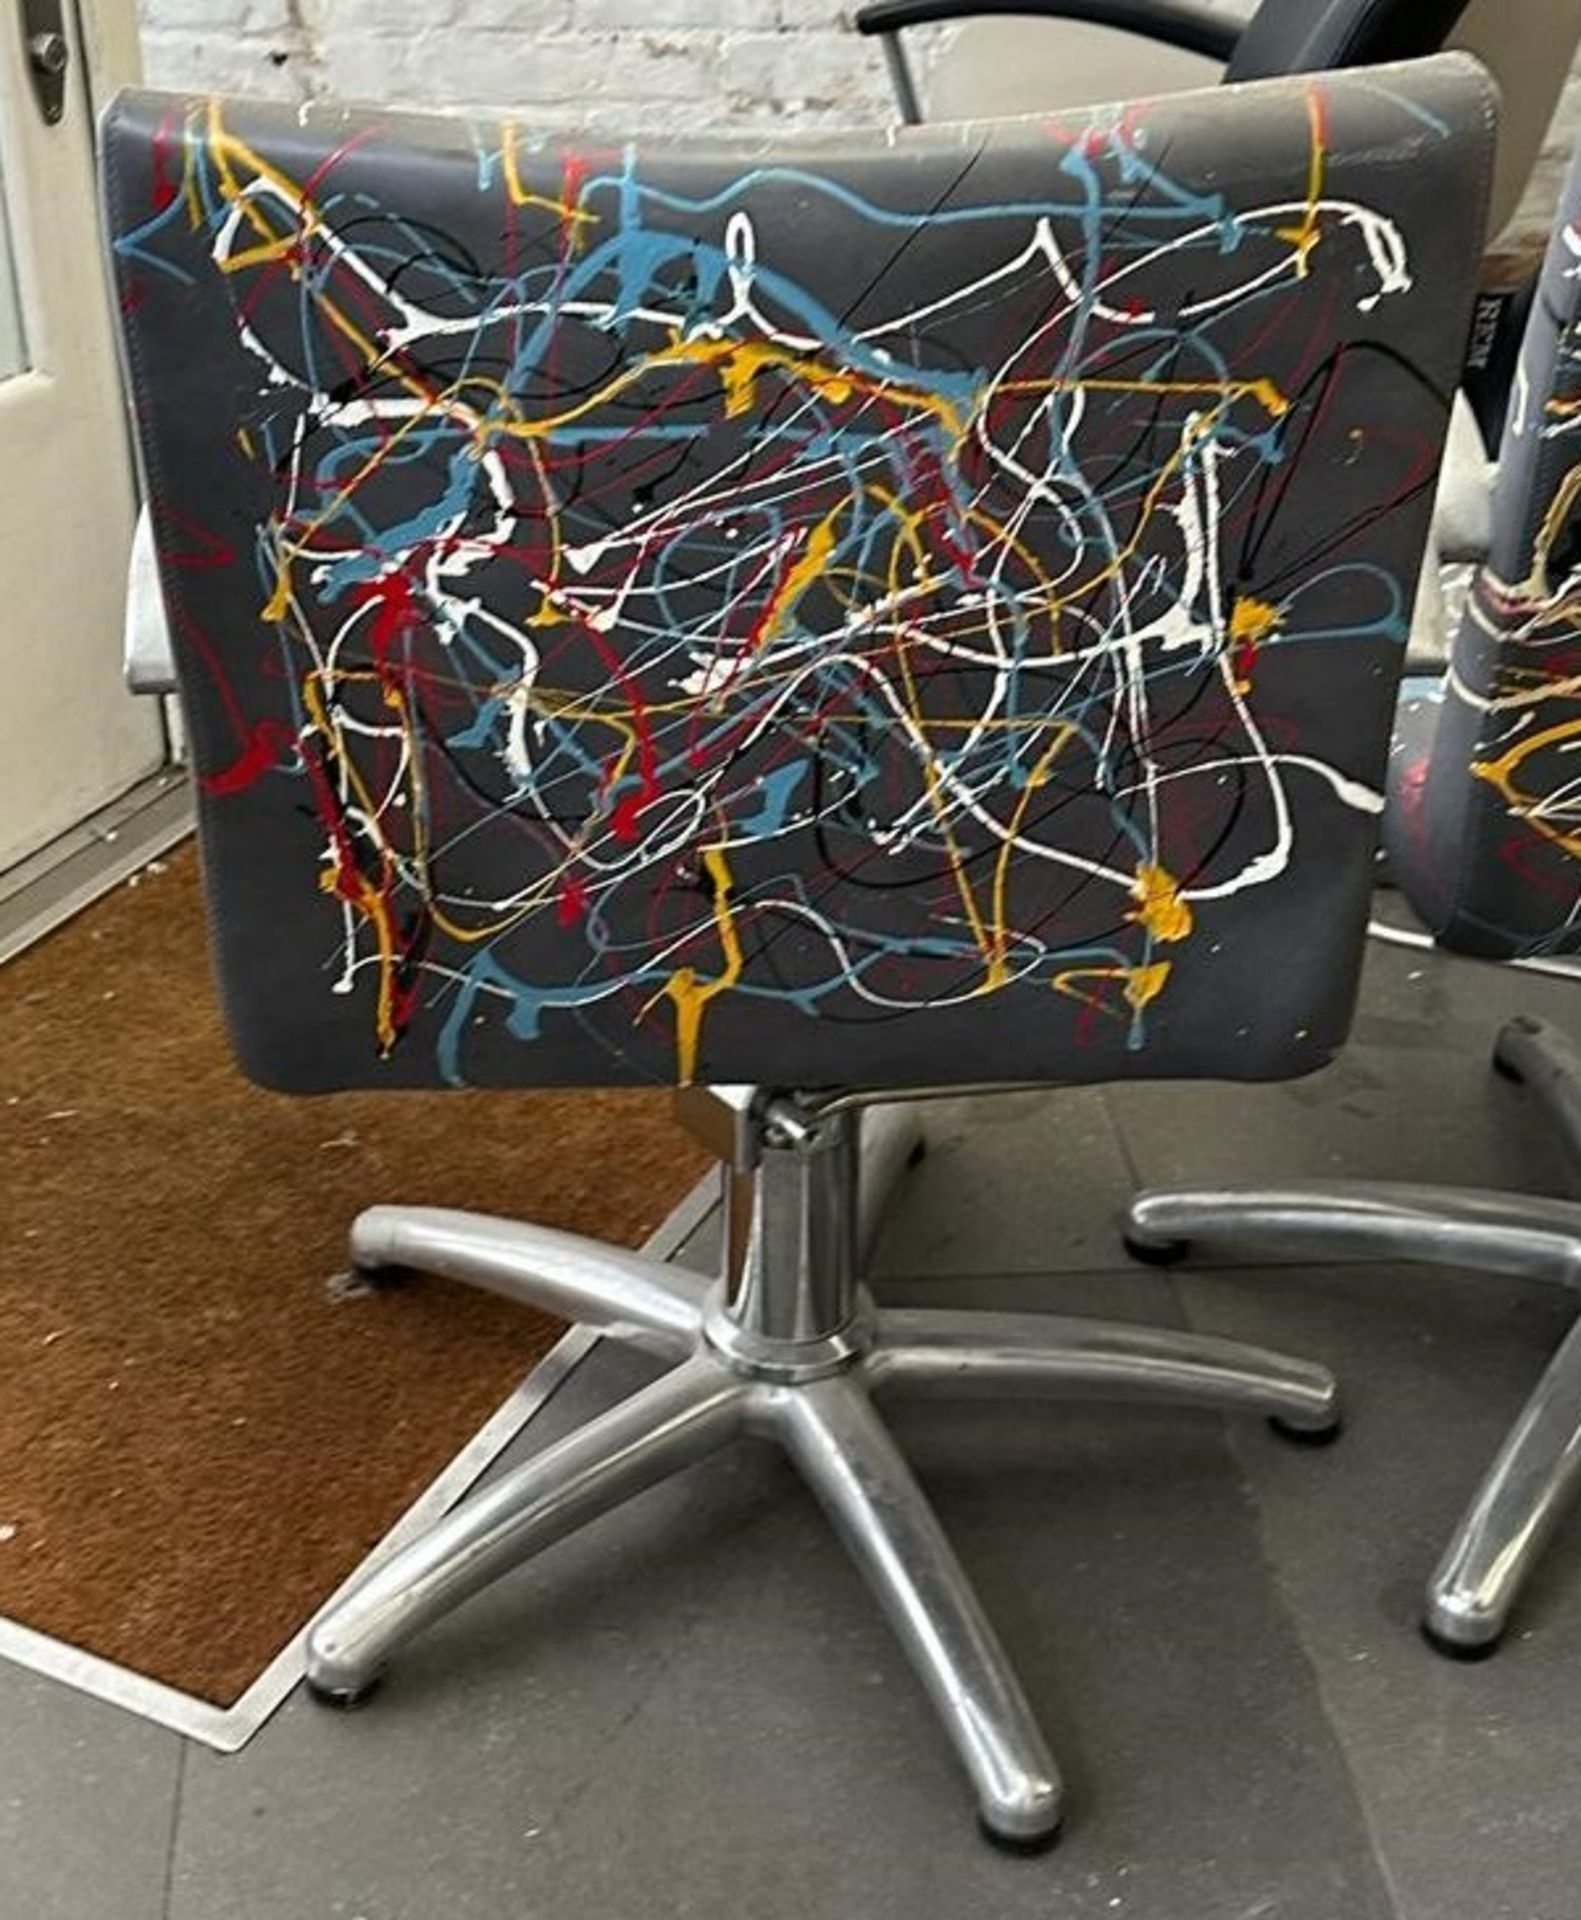 1 x REM Leather Stylist Chair Featuring Especially Commissioned Abstract Paintwork By A Renowned - Image 2 of 7